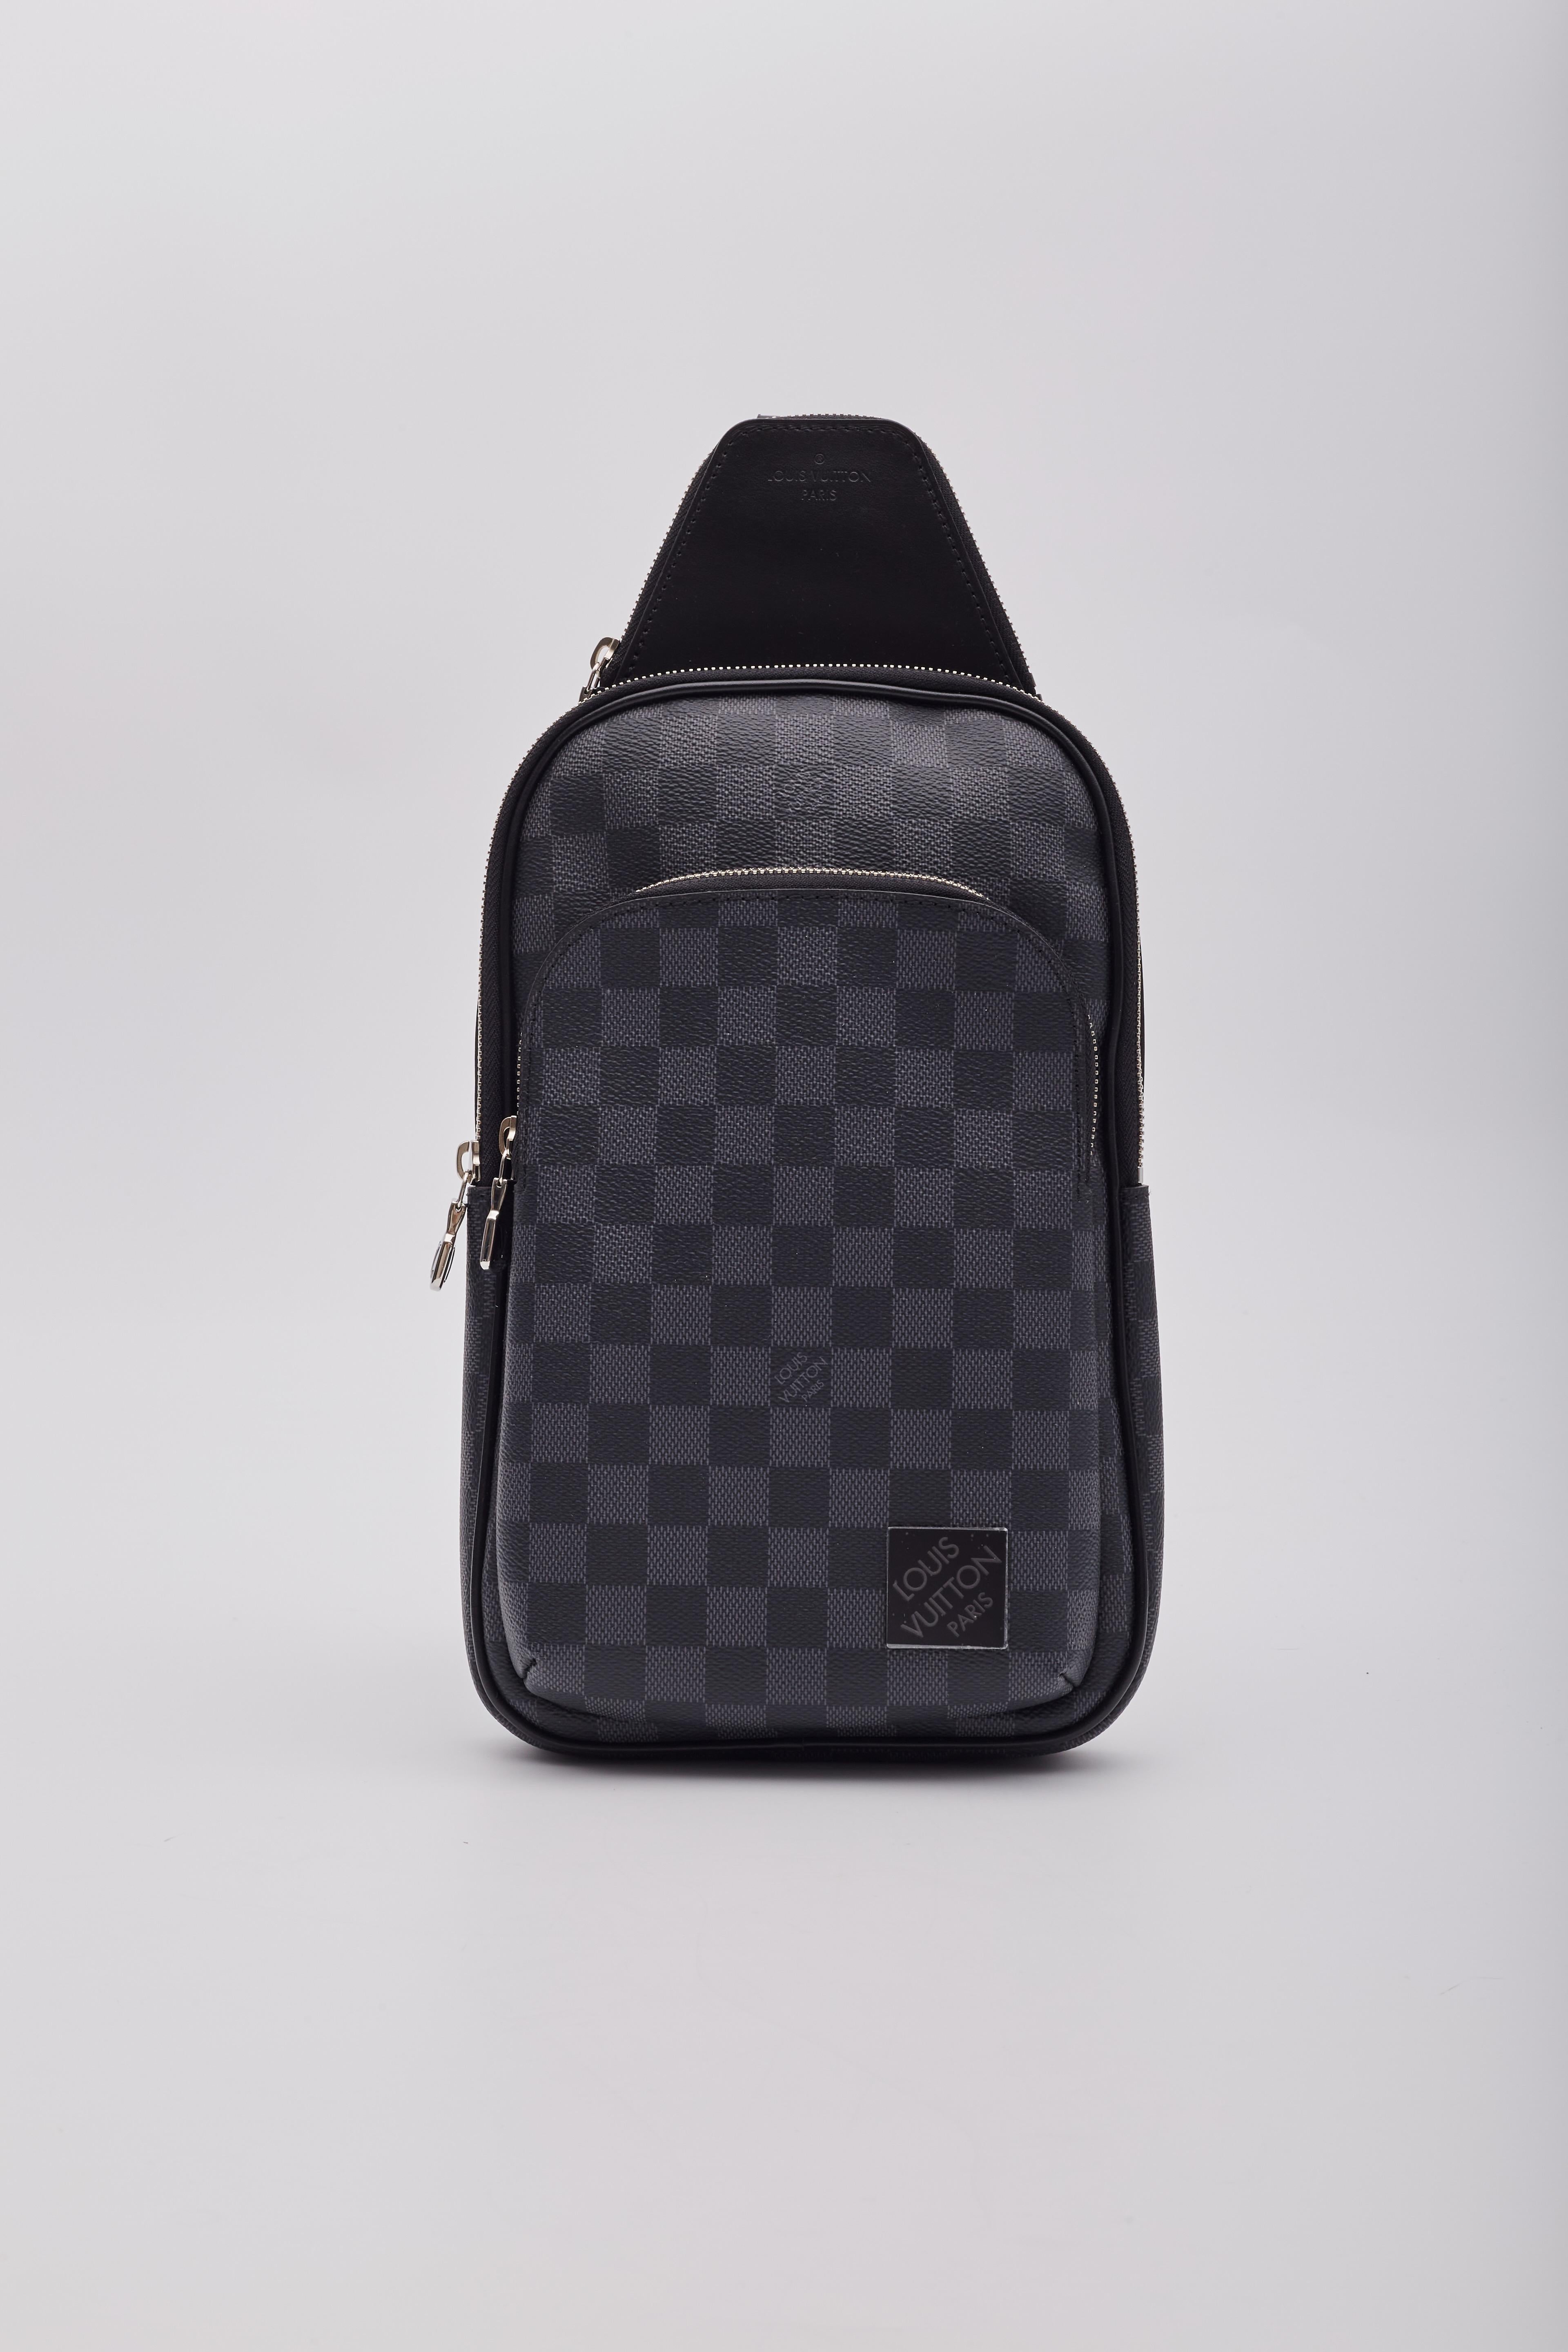 Louis Vuitton Damier Graphite Avenue Sling Messenger Bag Nm In Excellent Condition For Sale In Montreal, Quebec